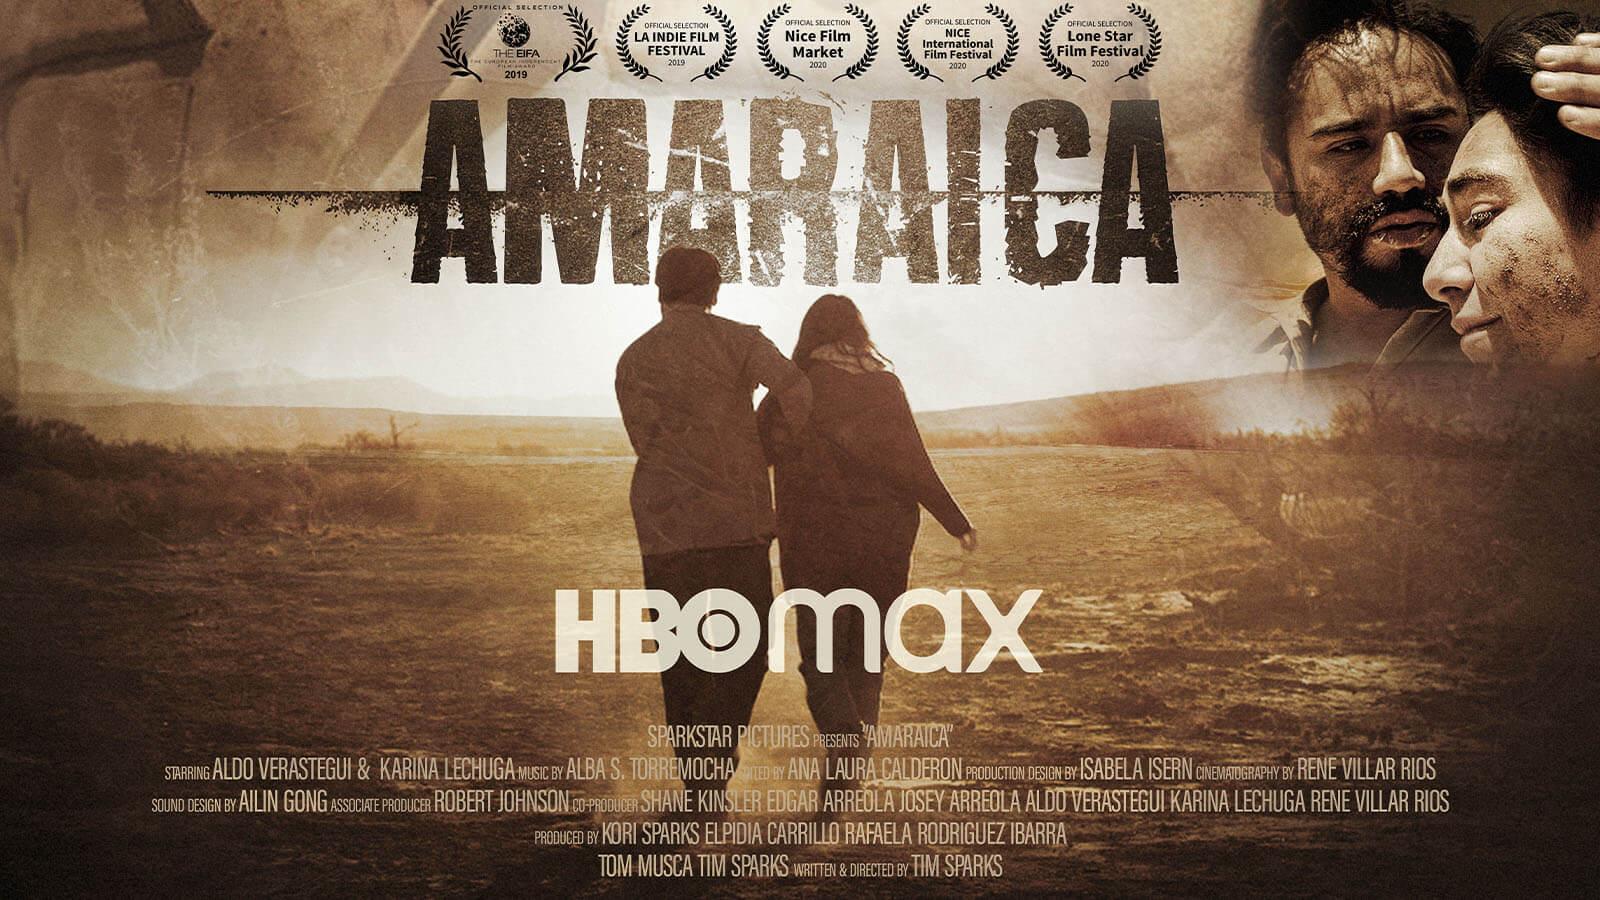 The movie poster for Amaraica. A man and a woman walk across a deserted field with their backs facing the camera.